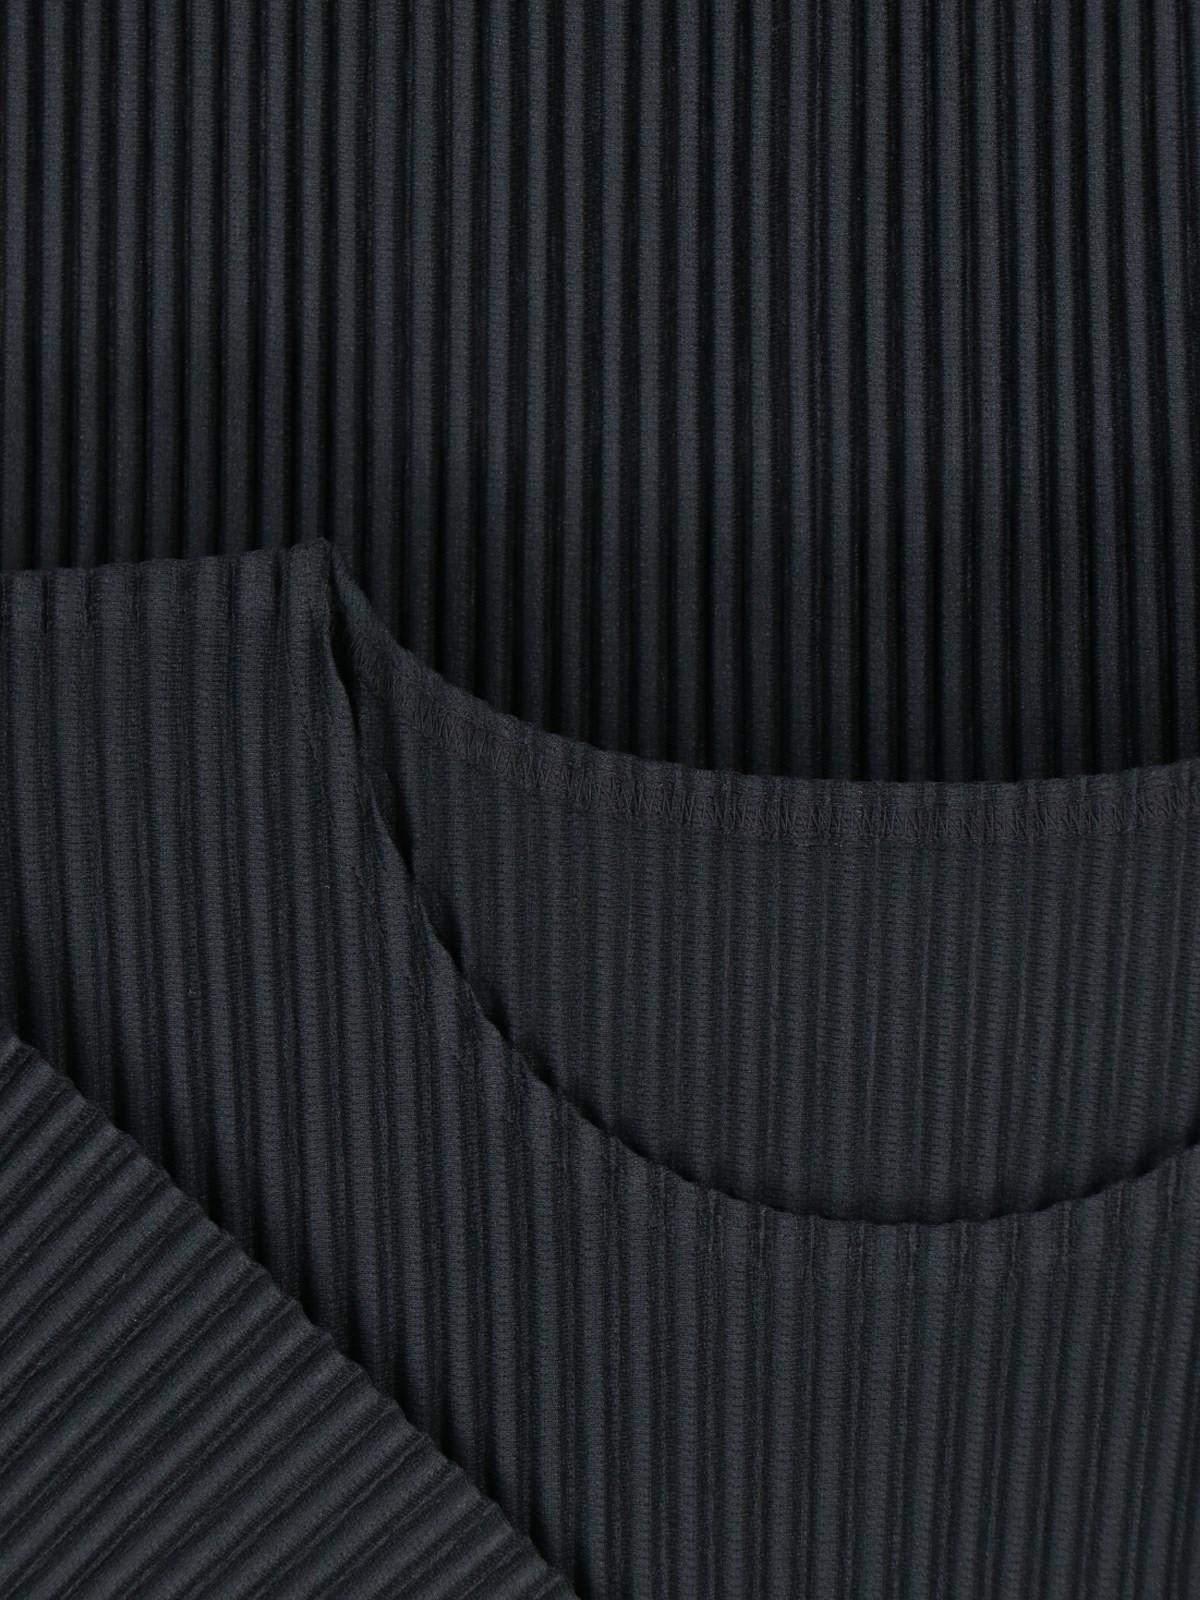 Issey Miyake Pleated T-shirt In Black